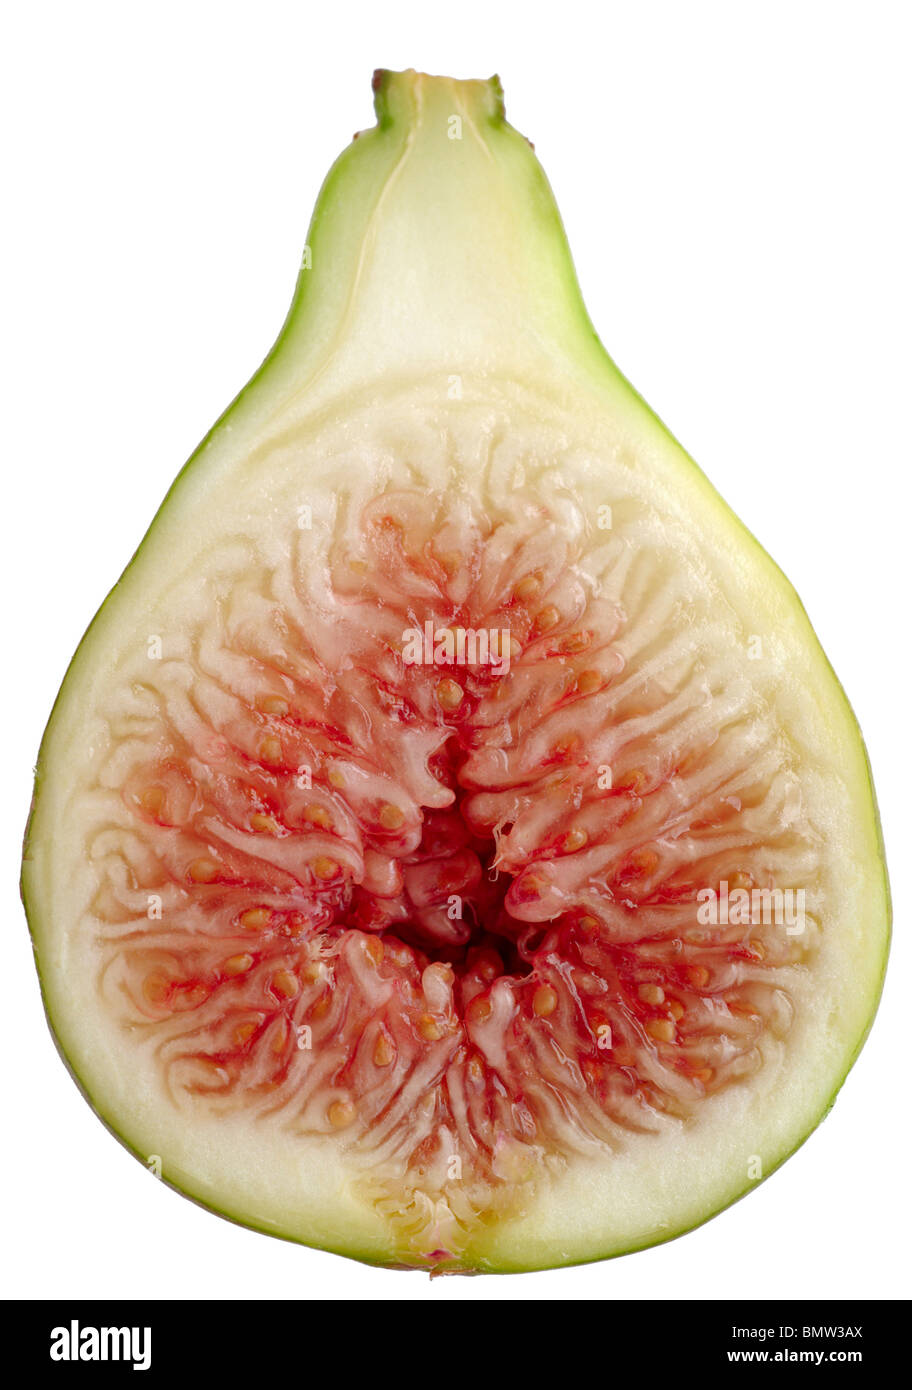 Close up of fig cut in half showing the edible red fruit. Stock Photo